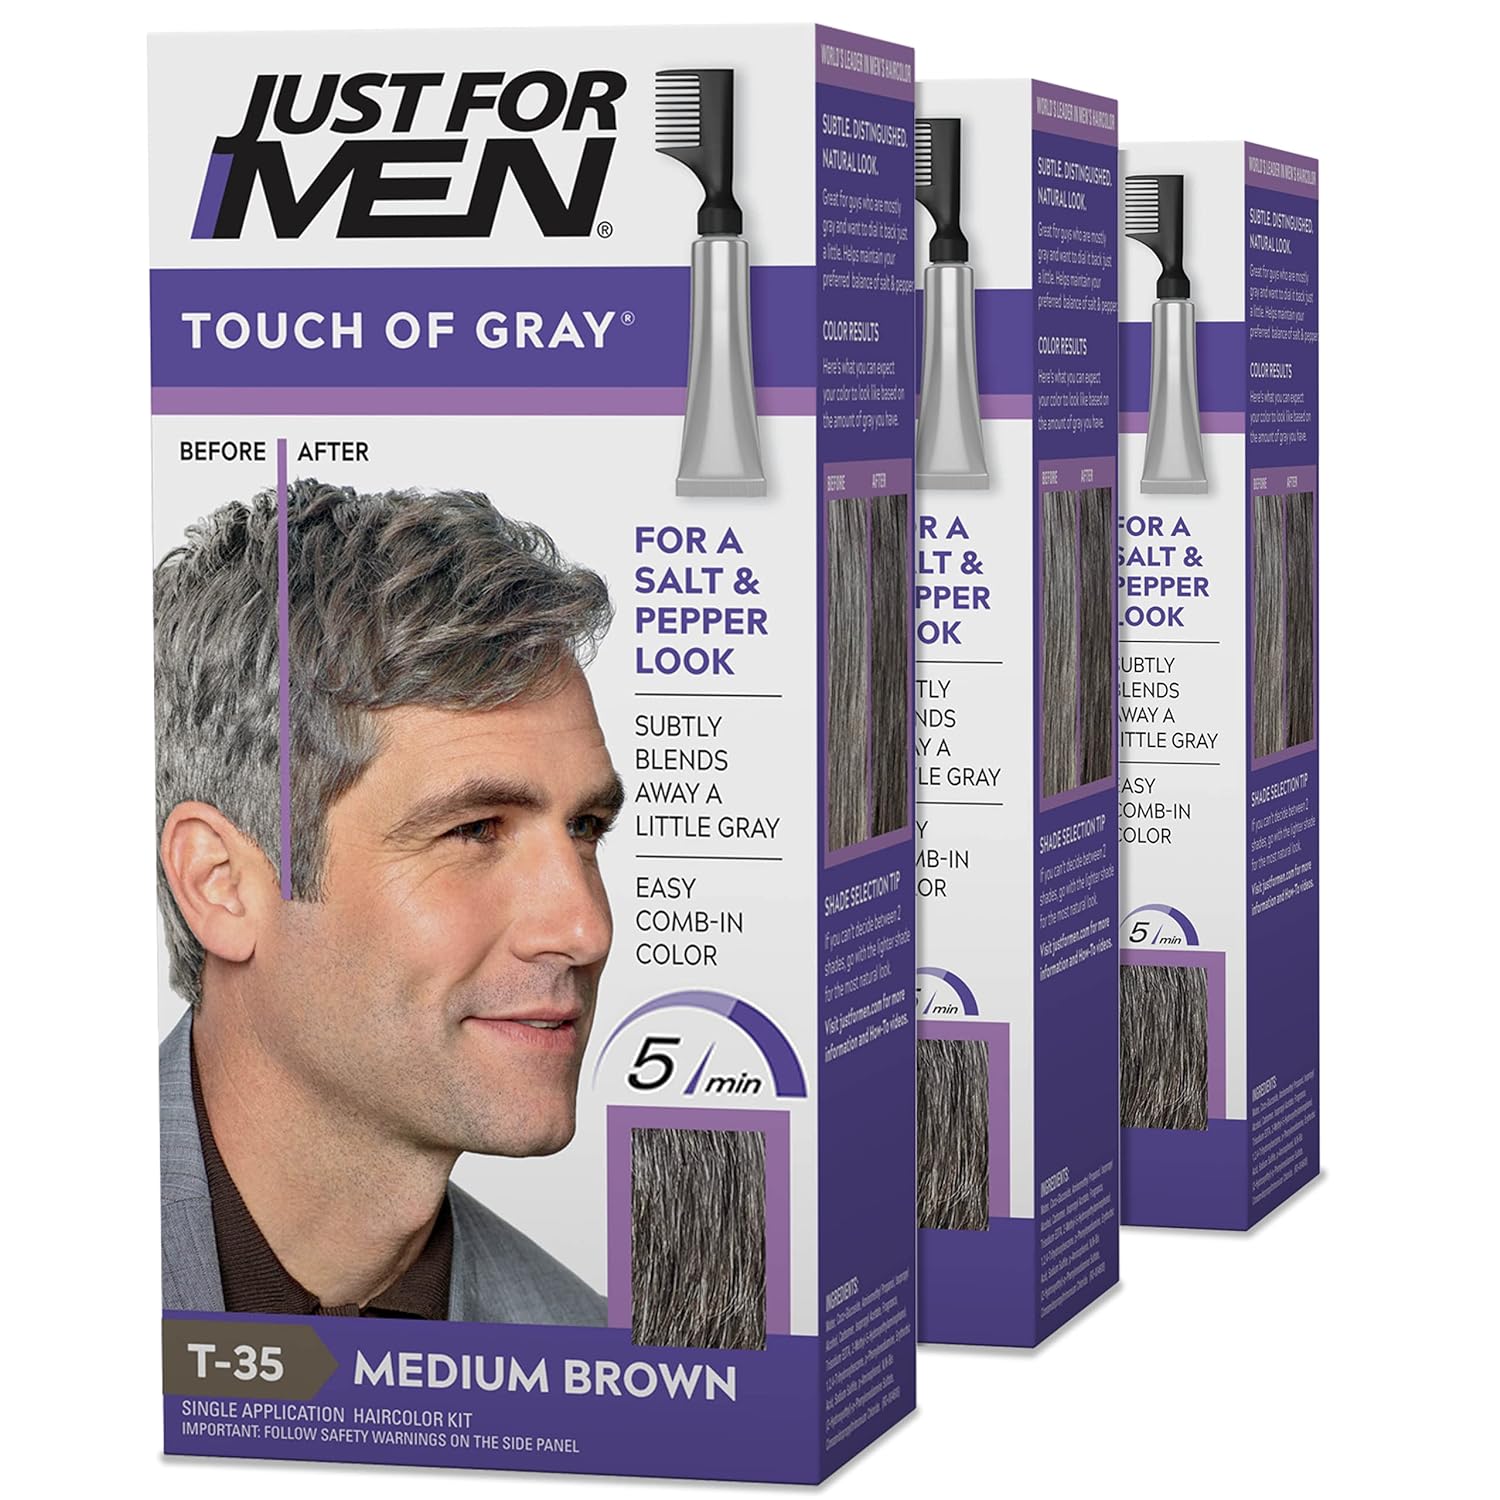 Just For Men Touch Of Gray, Gray Hair Coloring for Men 